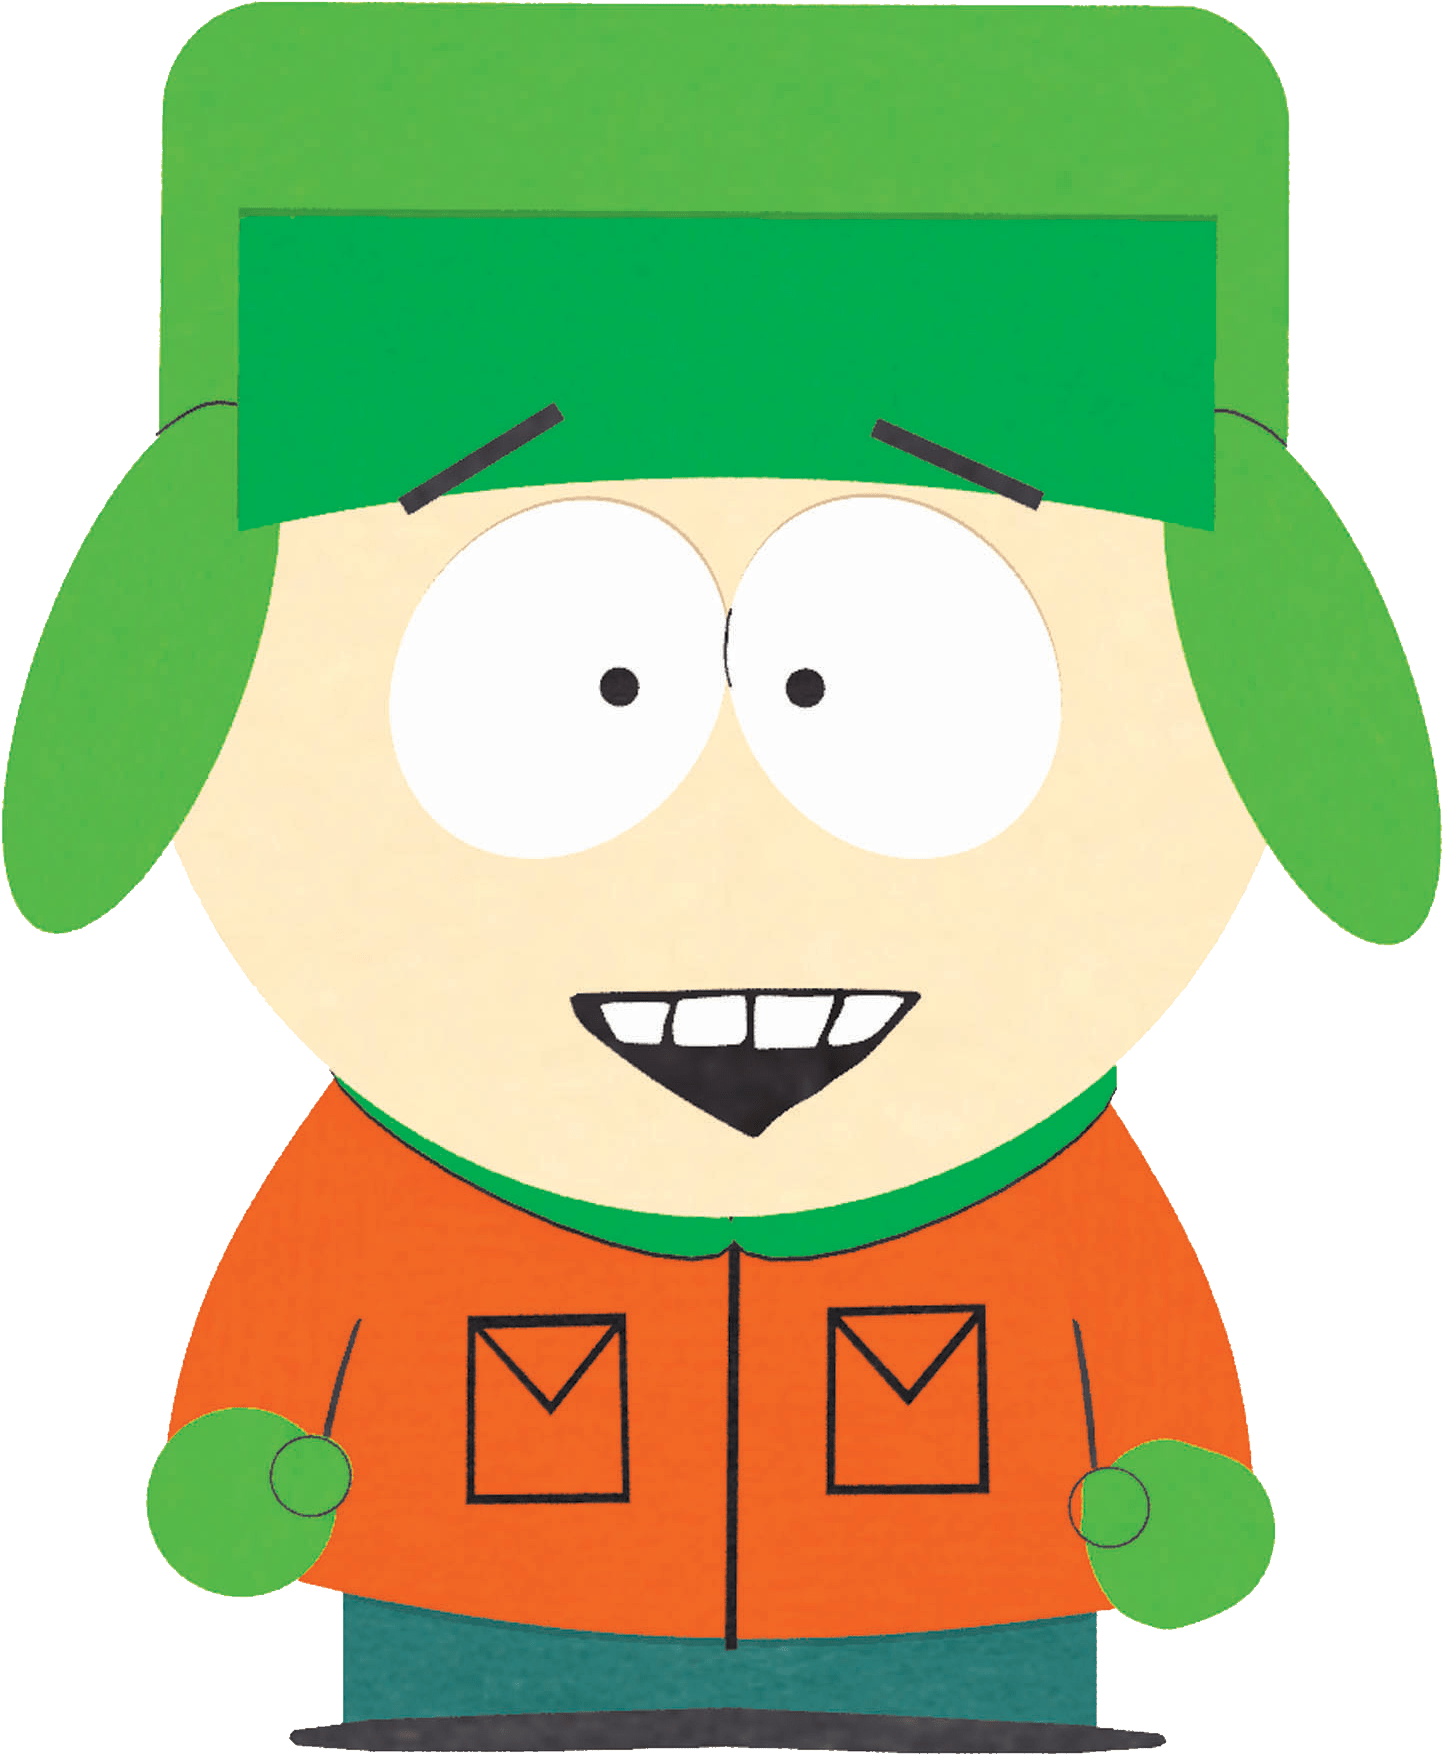 Cartoon Character With Green Hat And Green Gloves